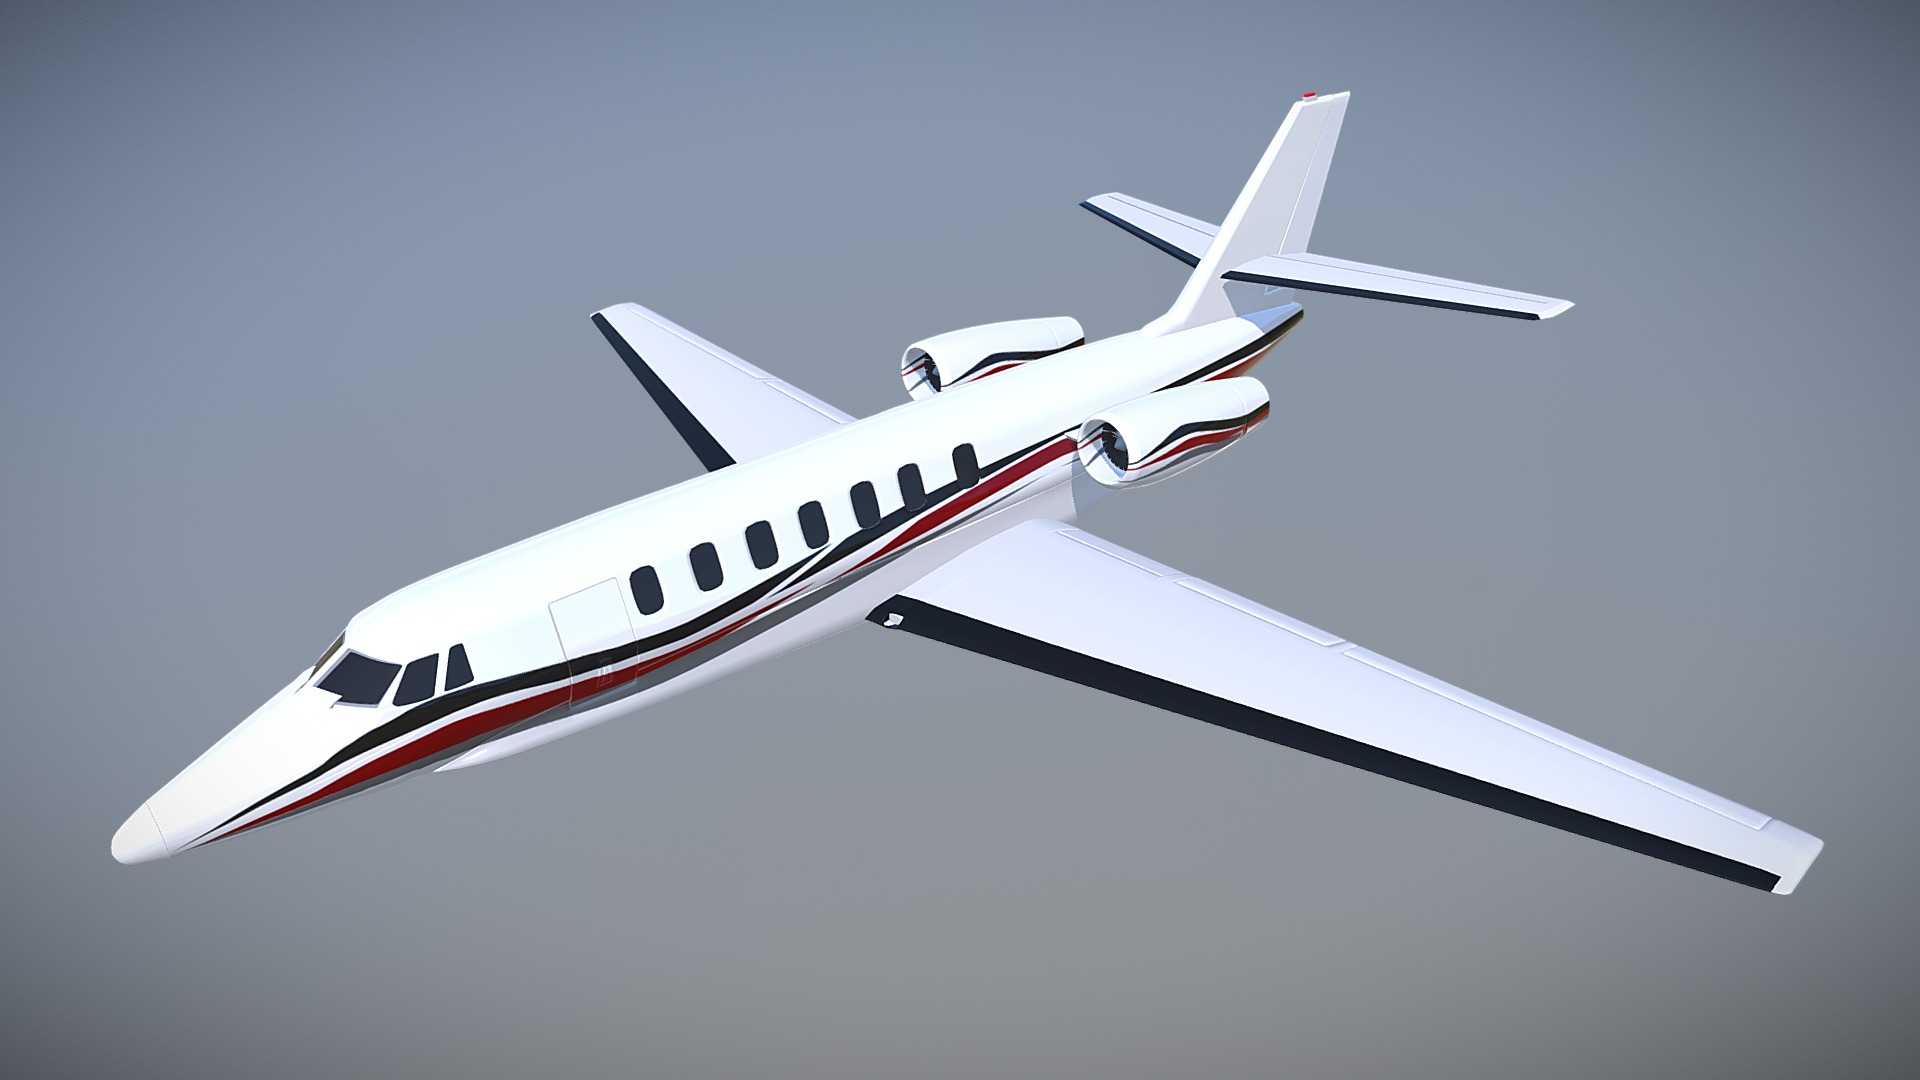 3D model Cessna Sovereign private jet - This is a 3D model of the Cessna Sovereign private jet. The 3D model is about a white and red airplane.